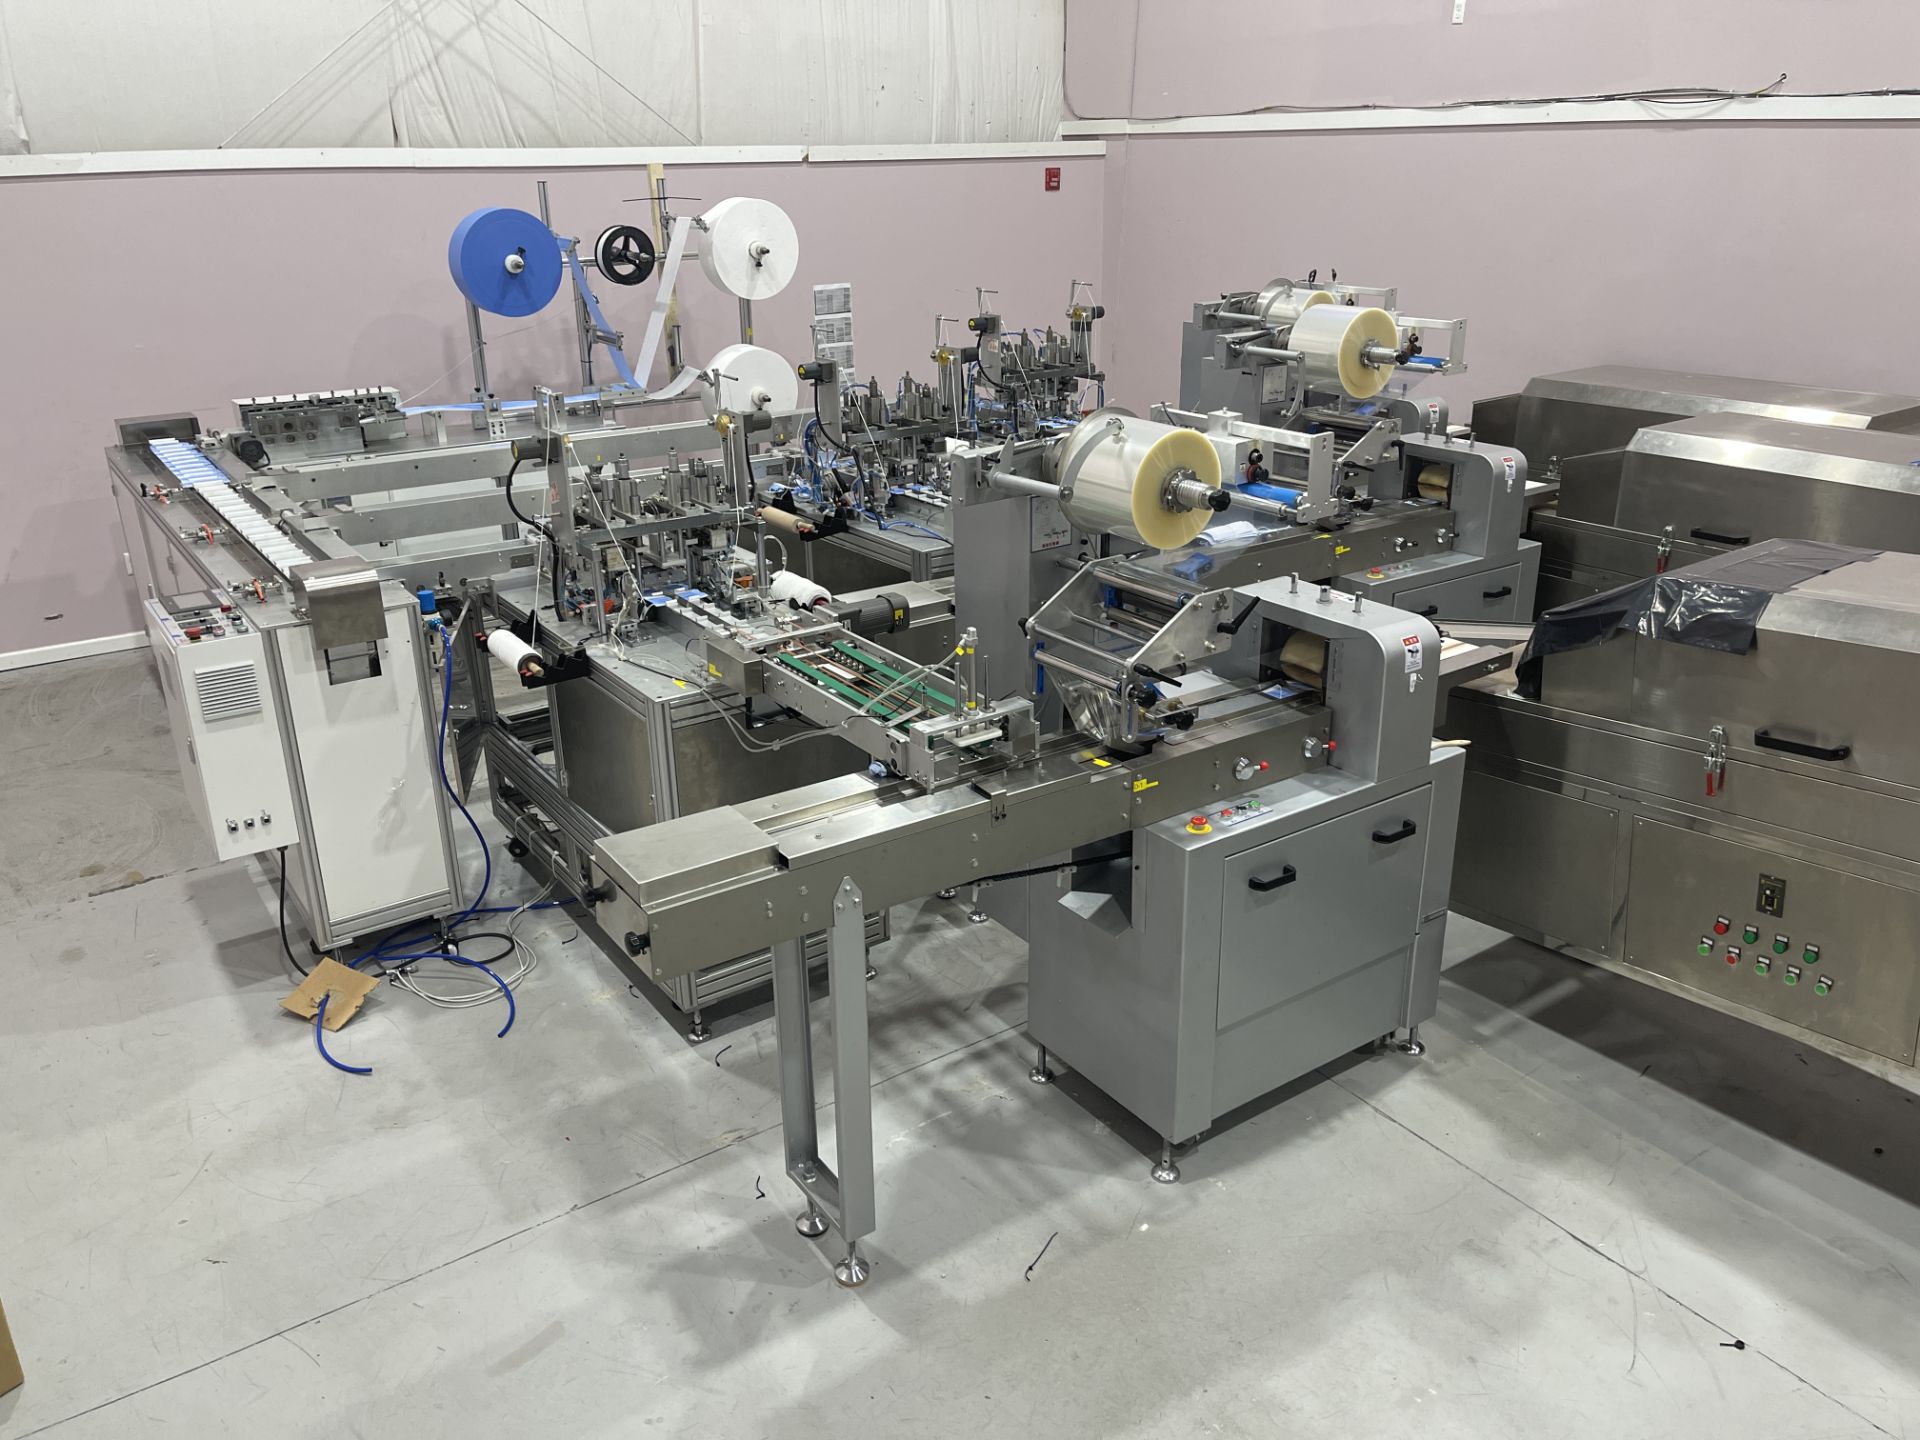 COMPLETE PACKAGE: 2020 3-Ply Disposable Medical Mask Assembly & Packaging Line Equipment, Includes: - Image 51 of 150